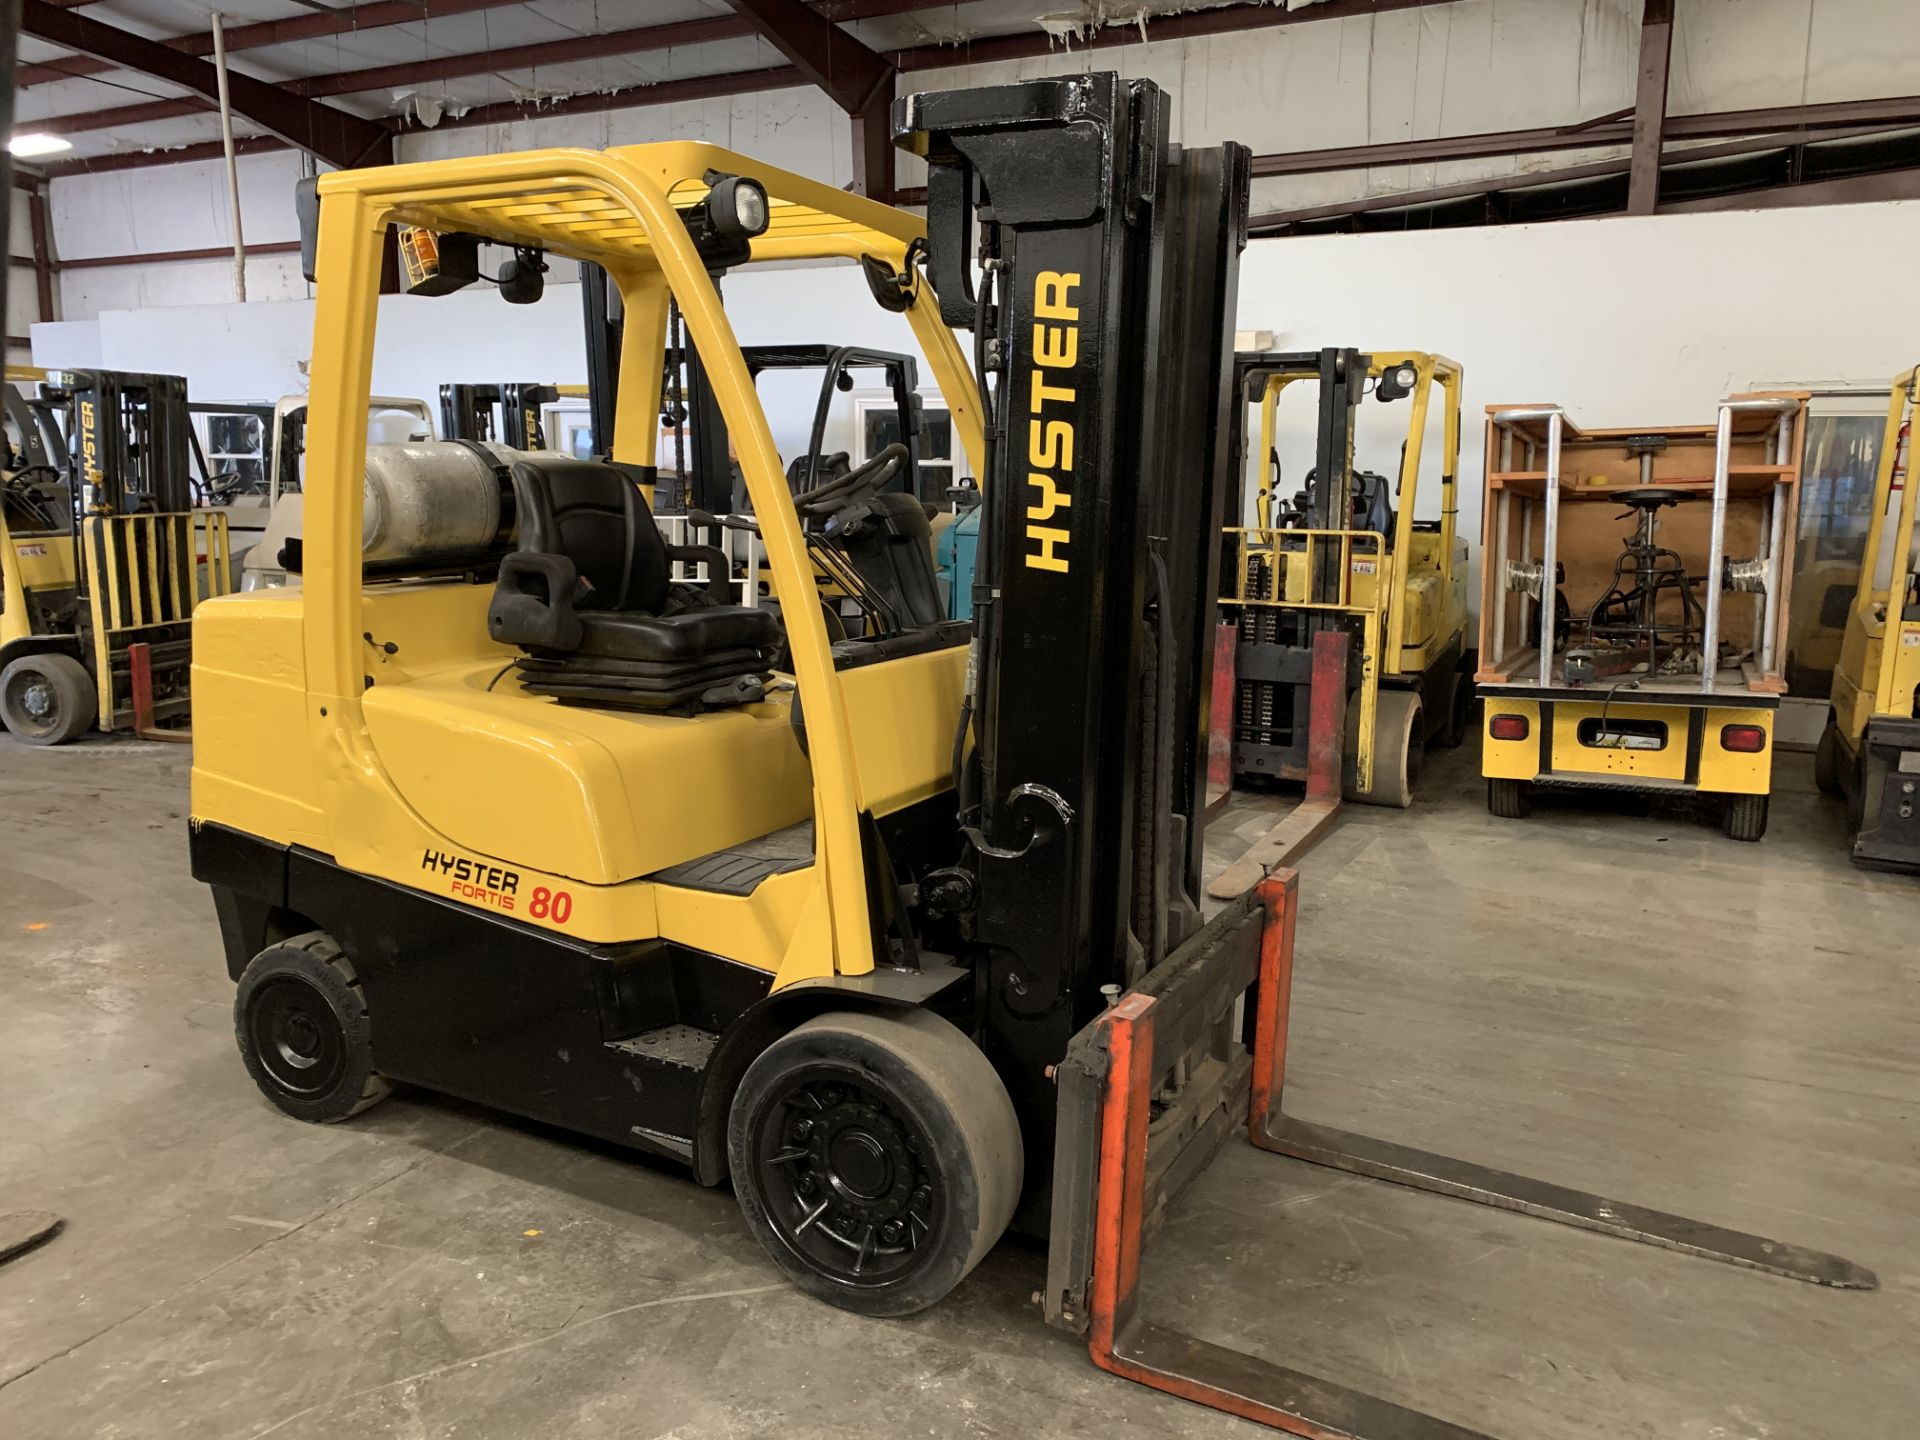 *LOCATED OHIO* 2013 HYSTER 8,000-LB. CAPACITY FORKLIFT, MODEL: S80FT, LPG, 185” Lift, SIDESHIFT - Image 3 of 5